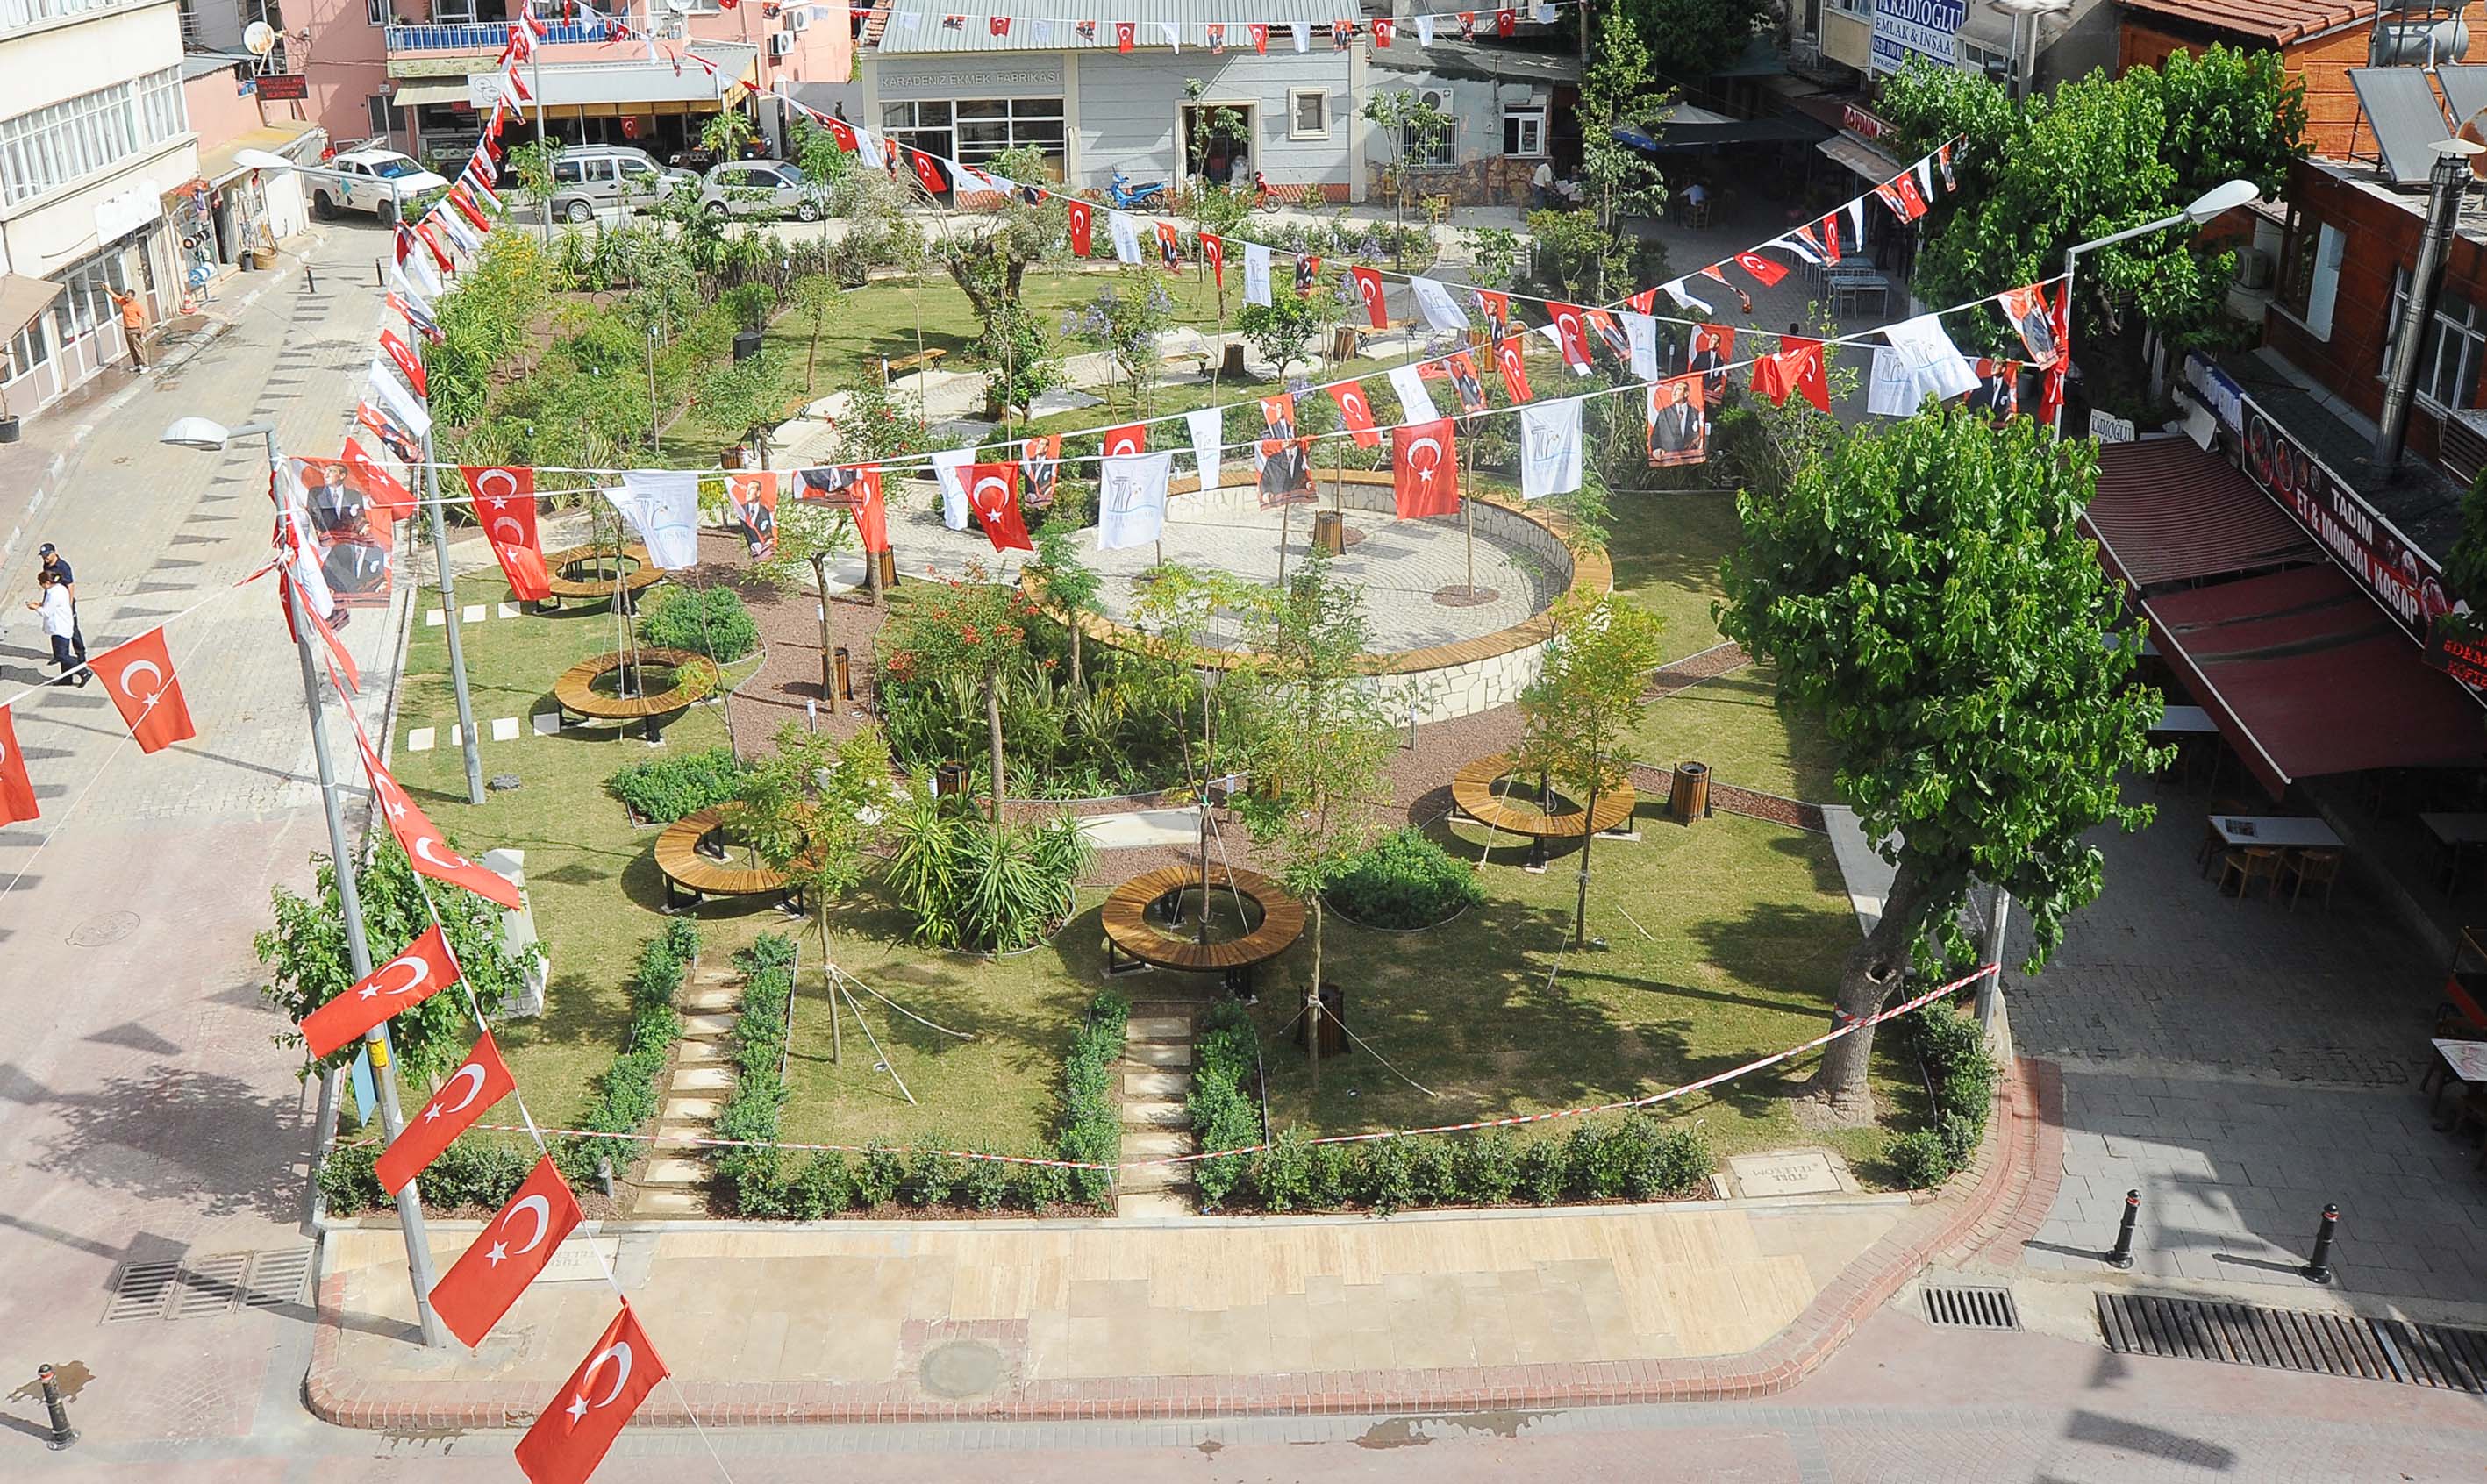 New Park at the Town Center